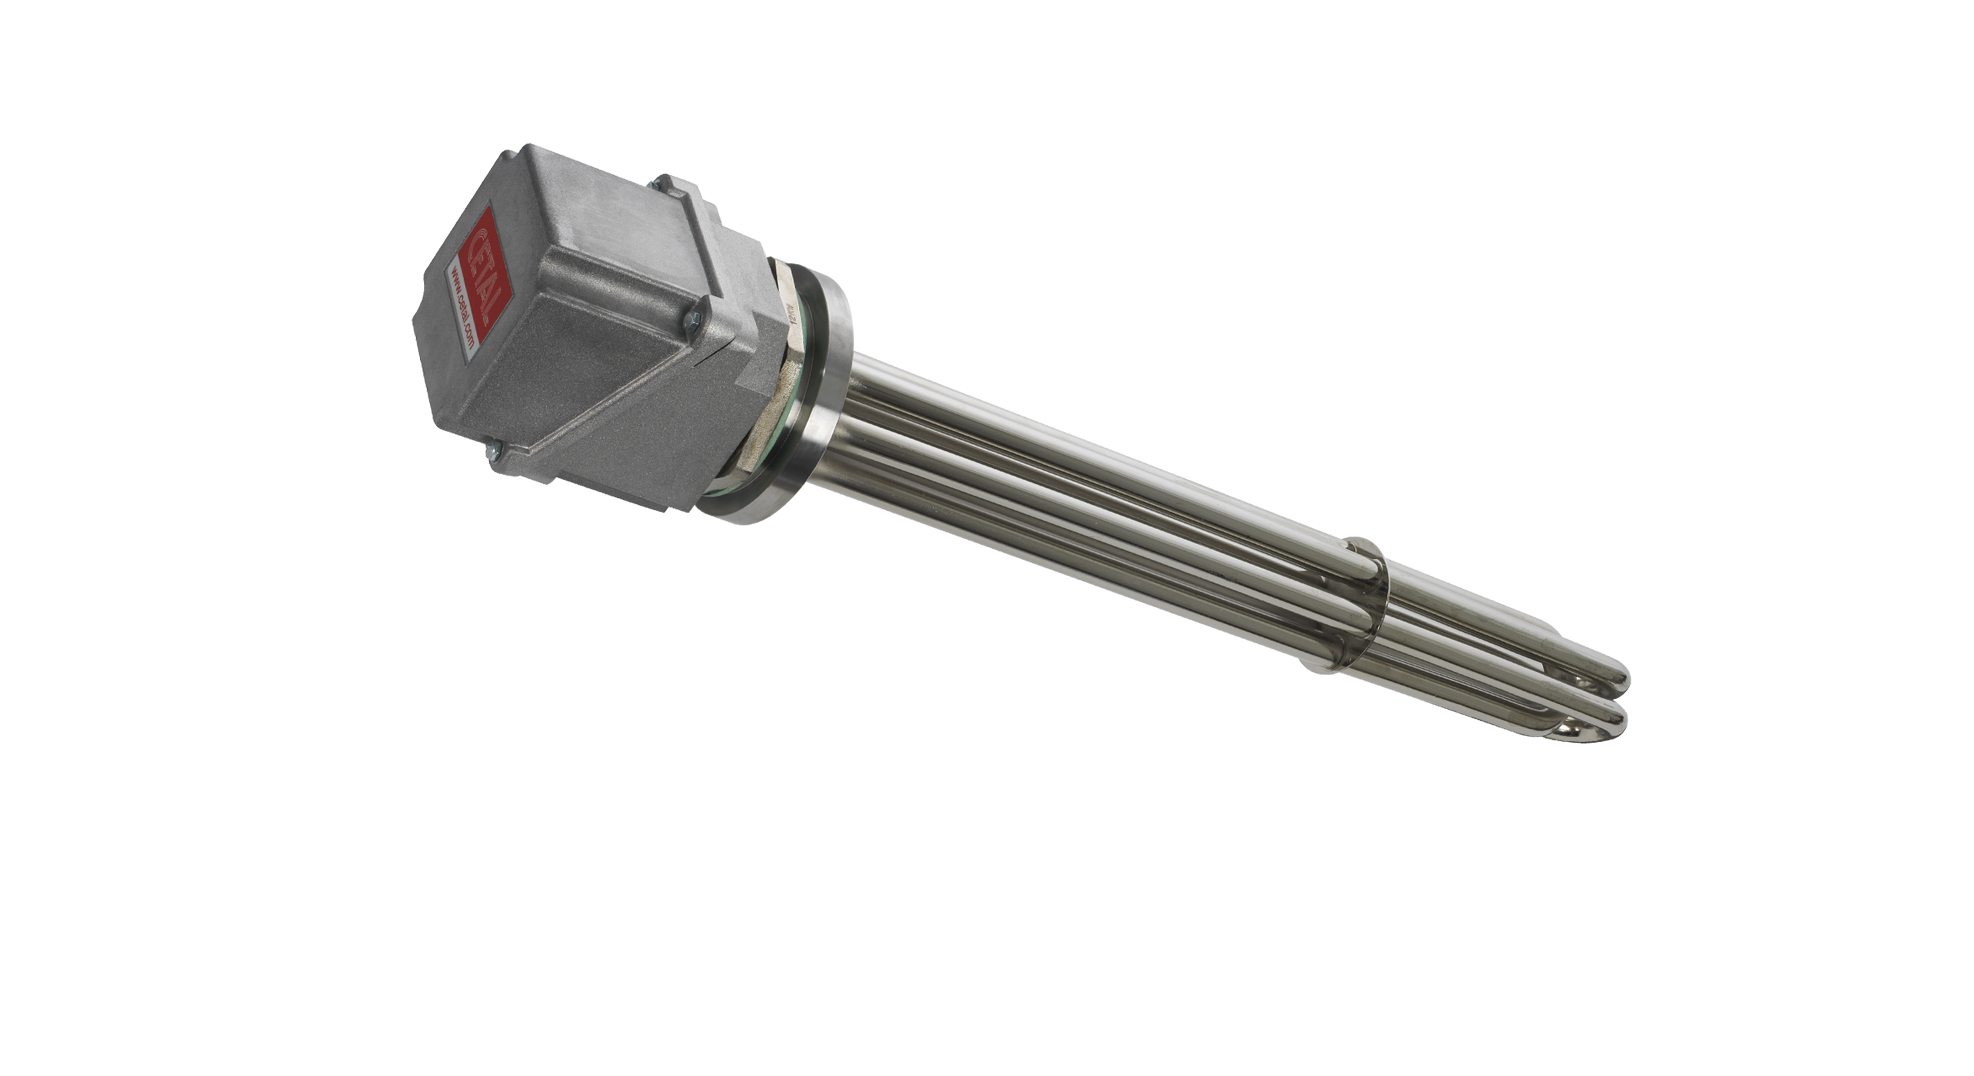 Titanium Heater Products, Buy An Industrial Flux Heater, Titanium  Immersion Heater & More